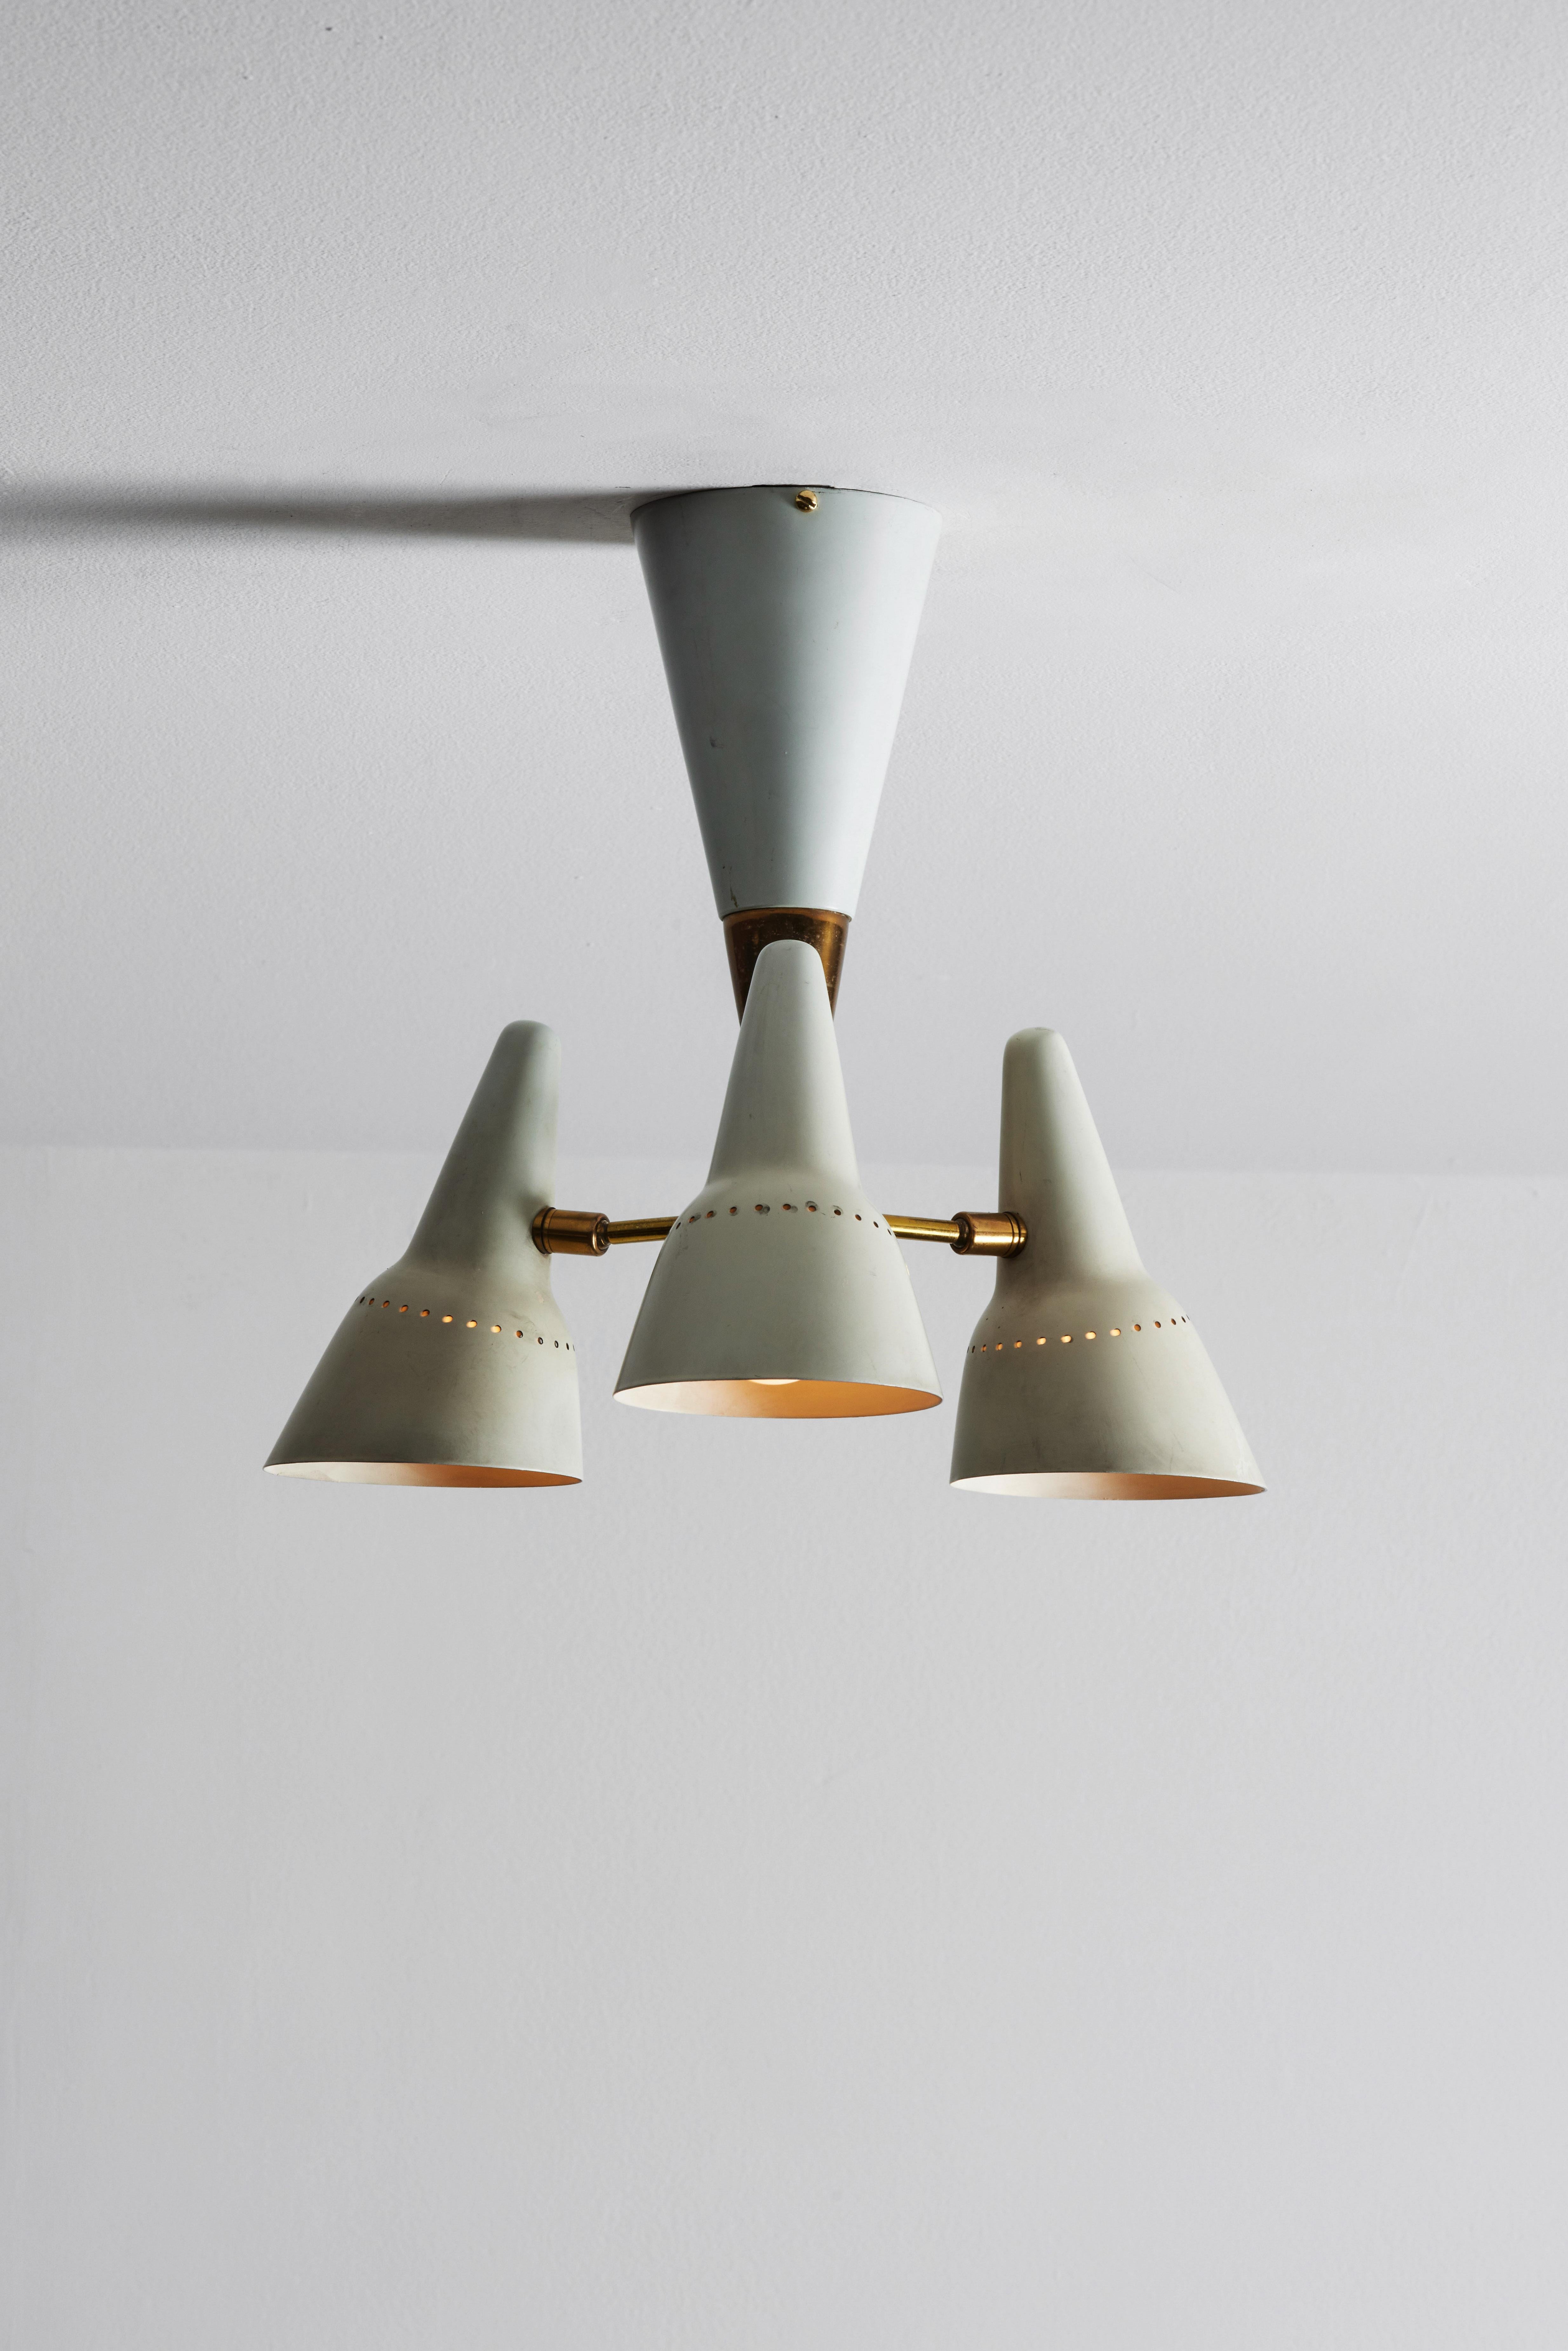 Flushmount ceiling light by Lumen. Manufactured in Italy, circa 1950s. Enameled metal, brass. Rewired for U.S. Standards. Shades articulate to various positions. We recommend three E26 40w maximum bulbs. Bulbs provided as a one time courtesy.